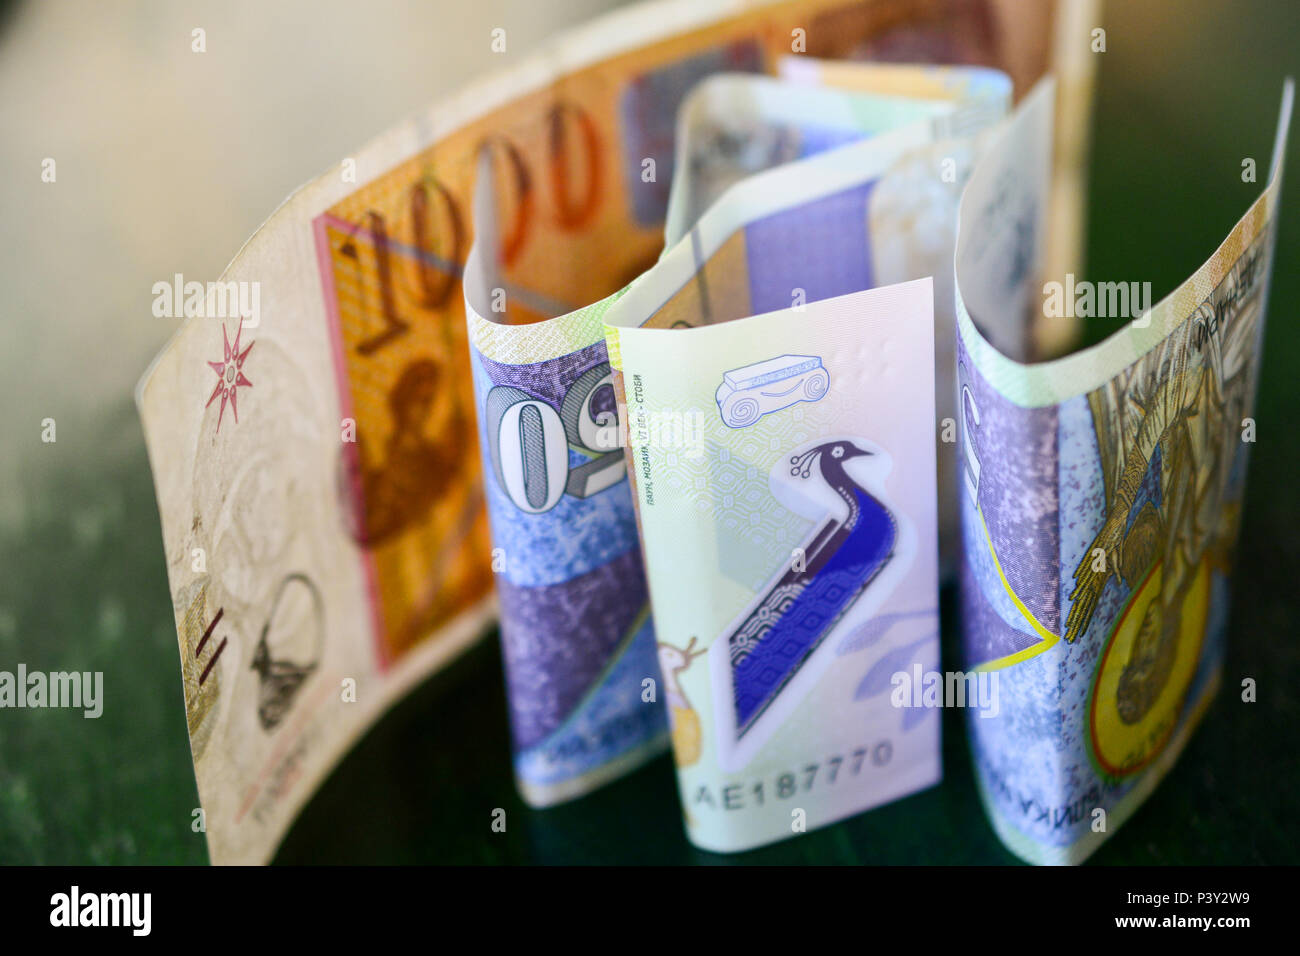 image of a denar macedonian curency , banknote Stock Photo - Alamy